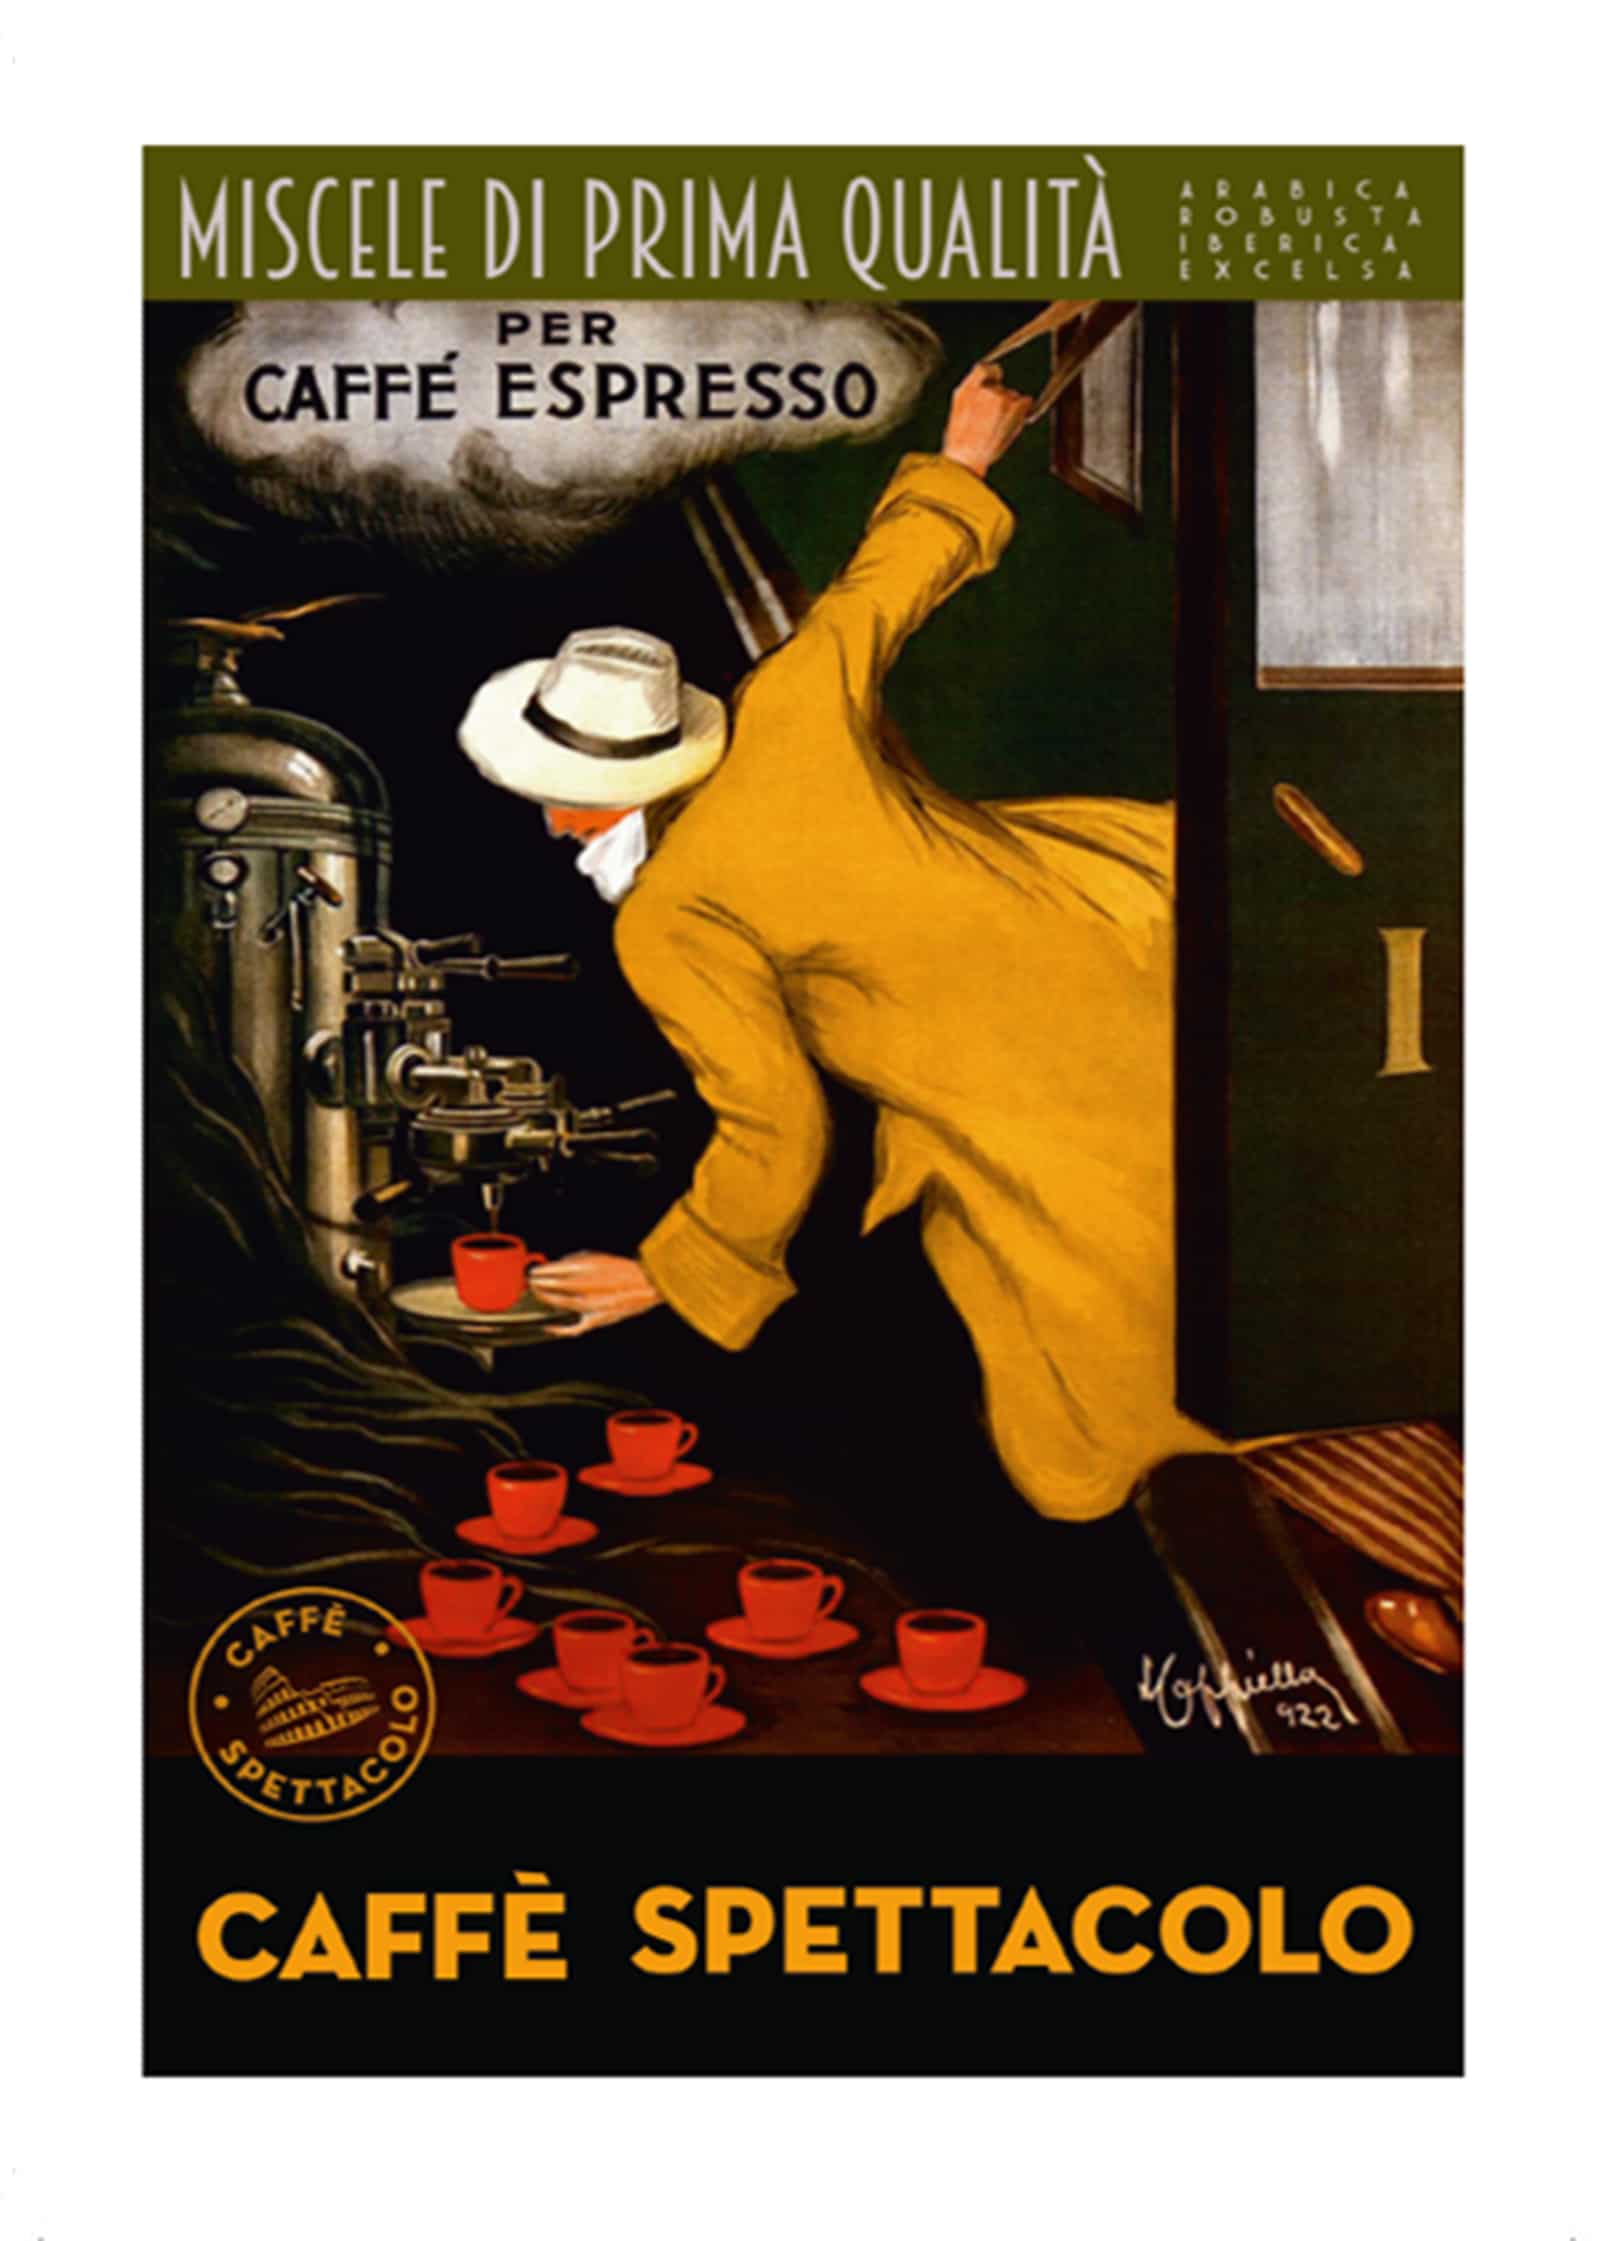 Anniversary promotion: Caffè Spettacolo thanks its guests with pre-paid postcards and a range of coffee vouchers.